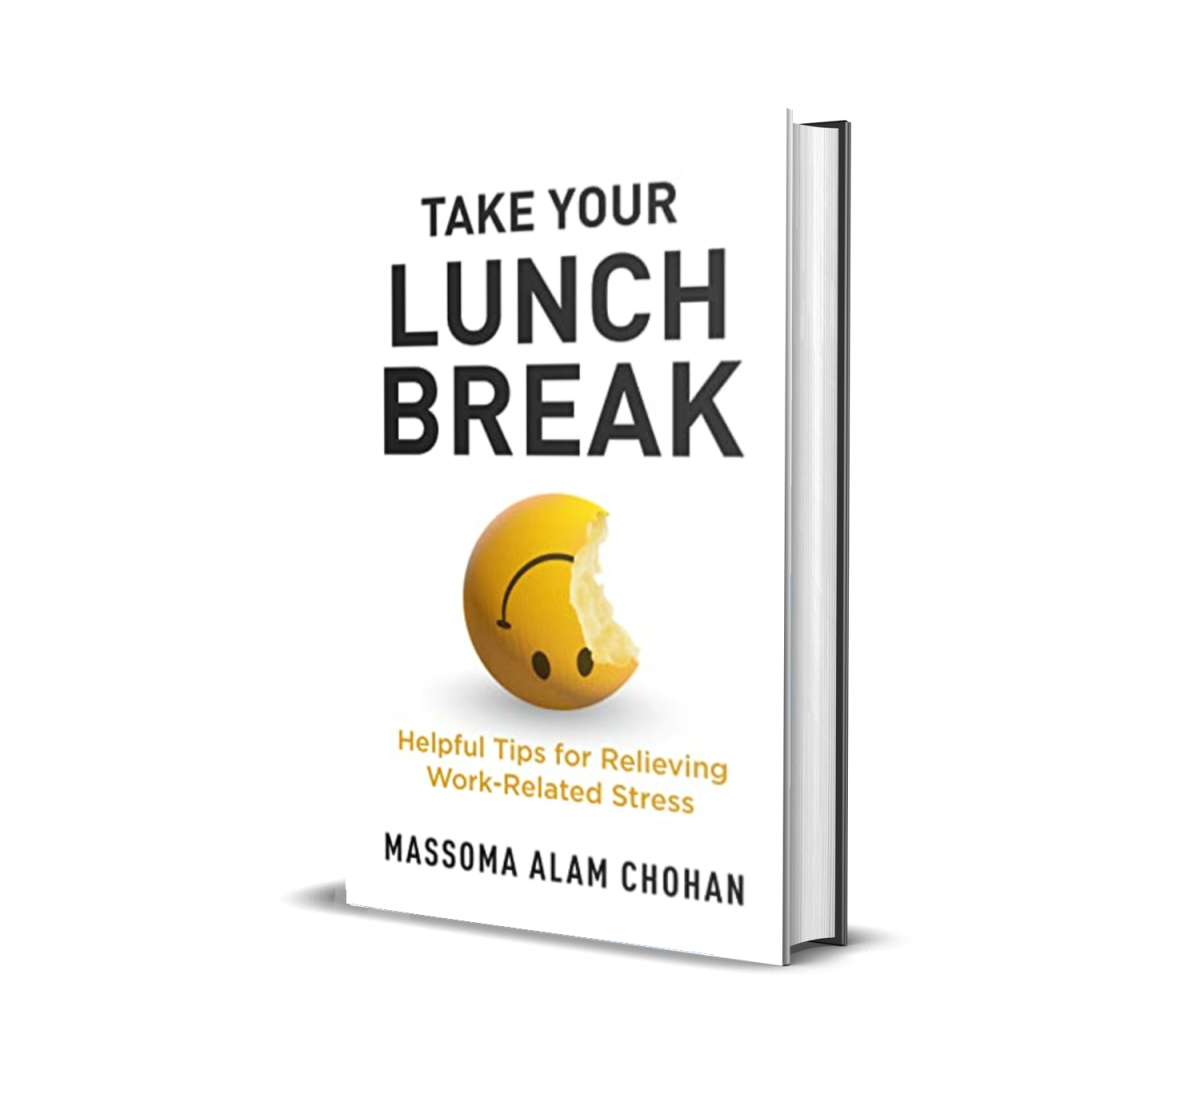 Book Review & Excerpt: 'Take Your Lunch Break: Helpful Tips for Relieving Work-related Stress' by Massoma Alam Chohan